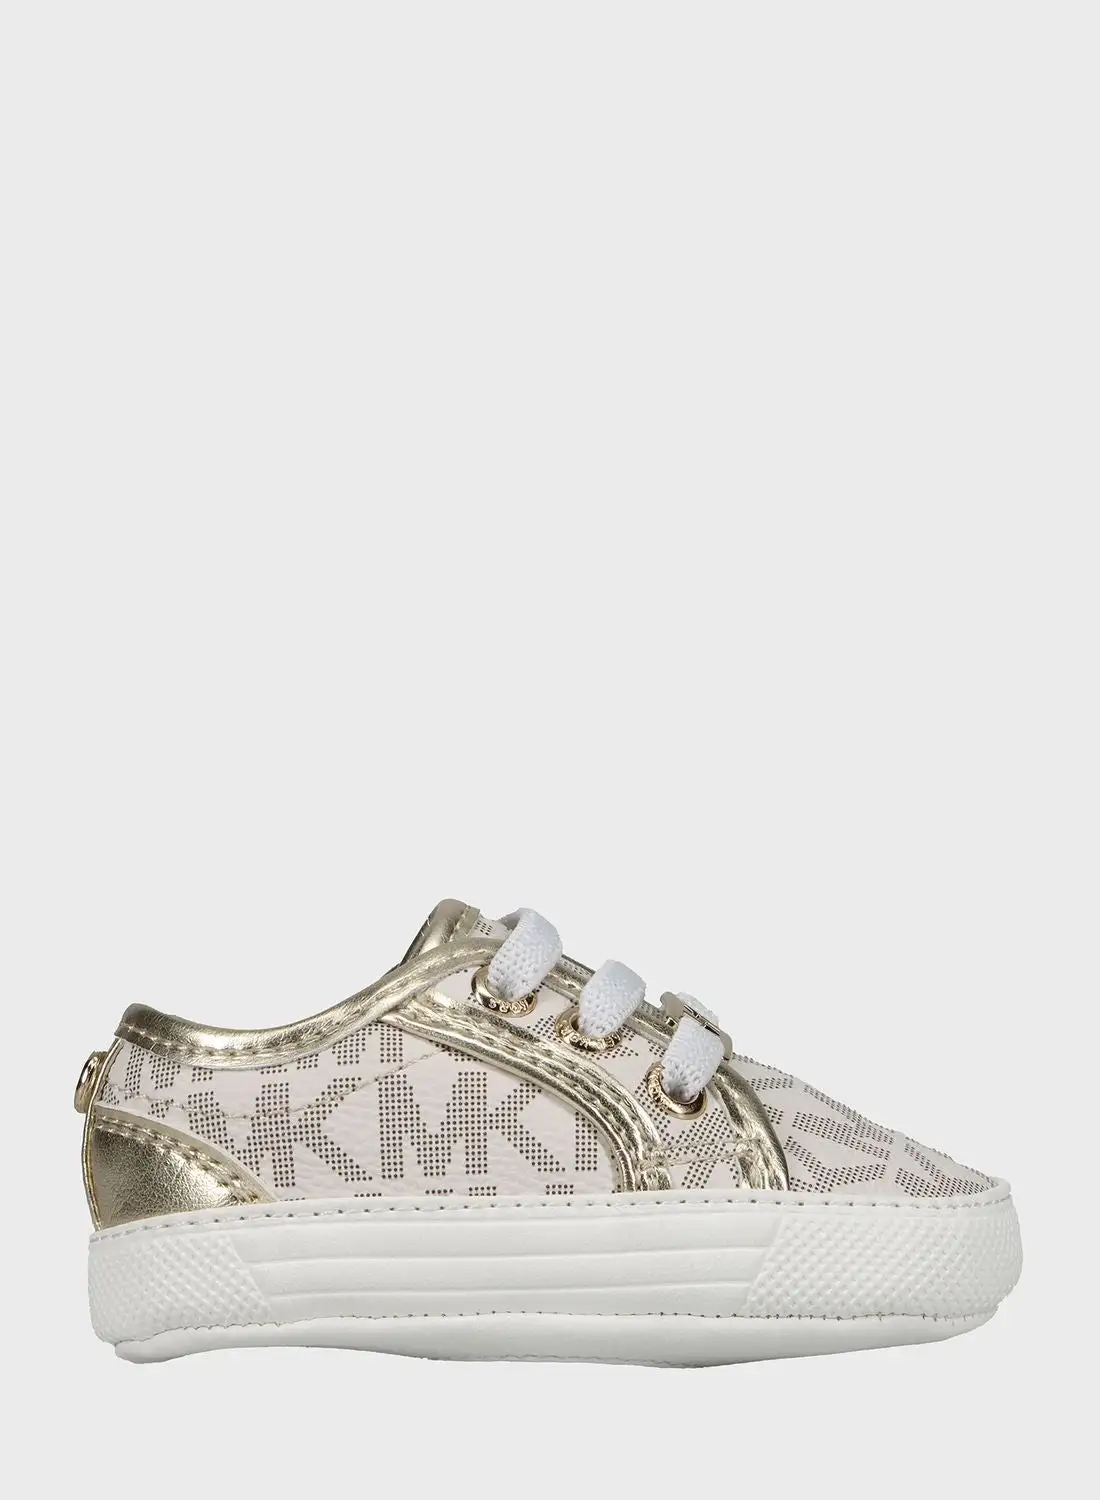 Michael Kors Infant Baby Sneaker Low Top Lace Up Sneakers